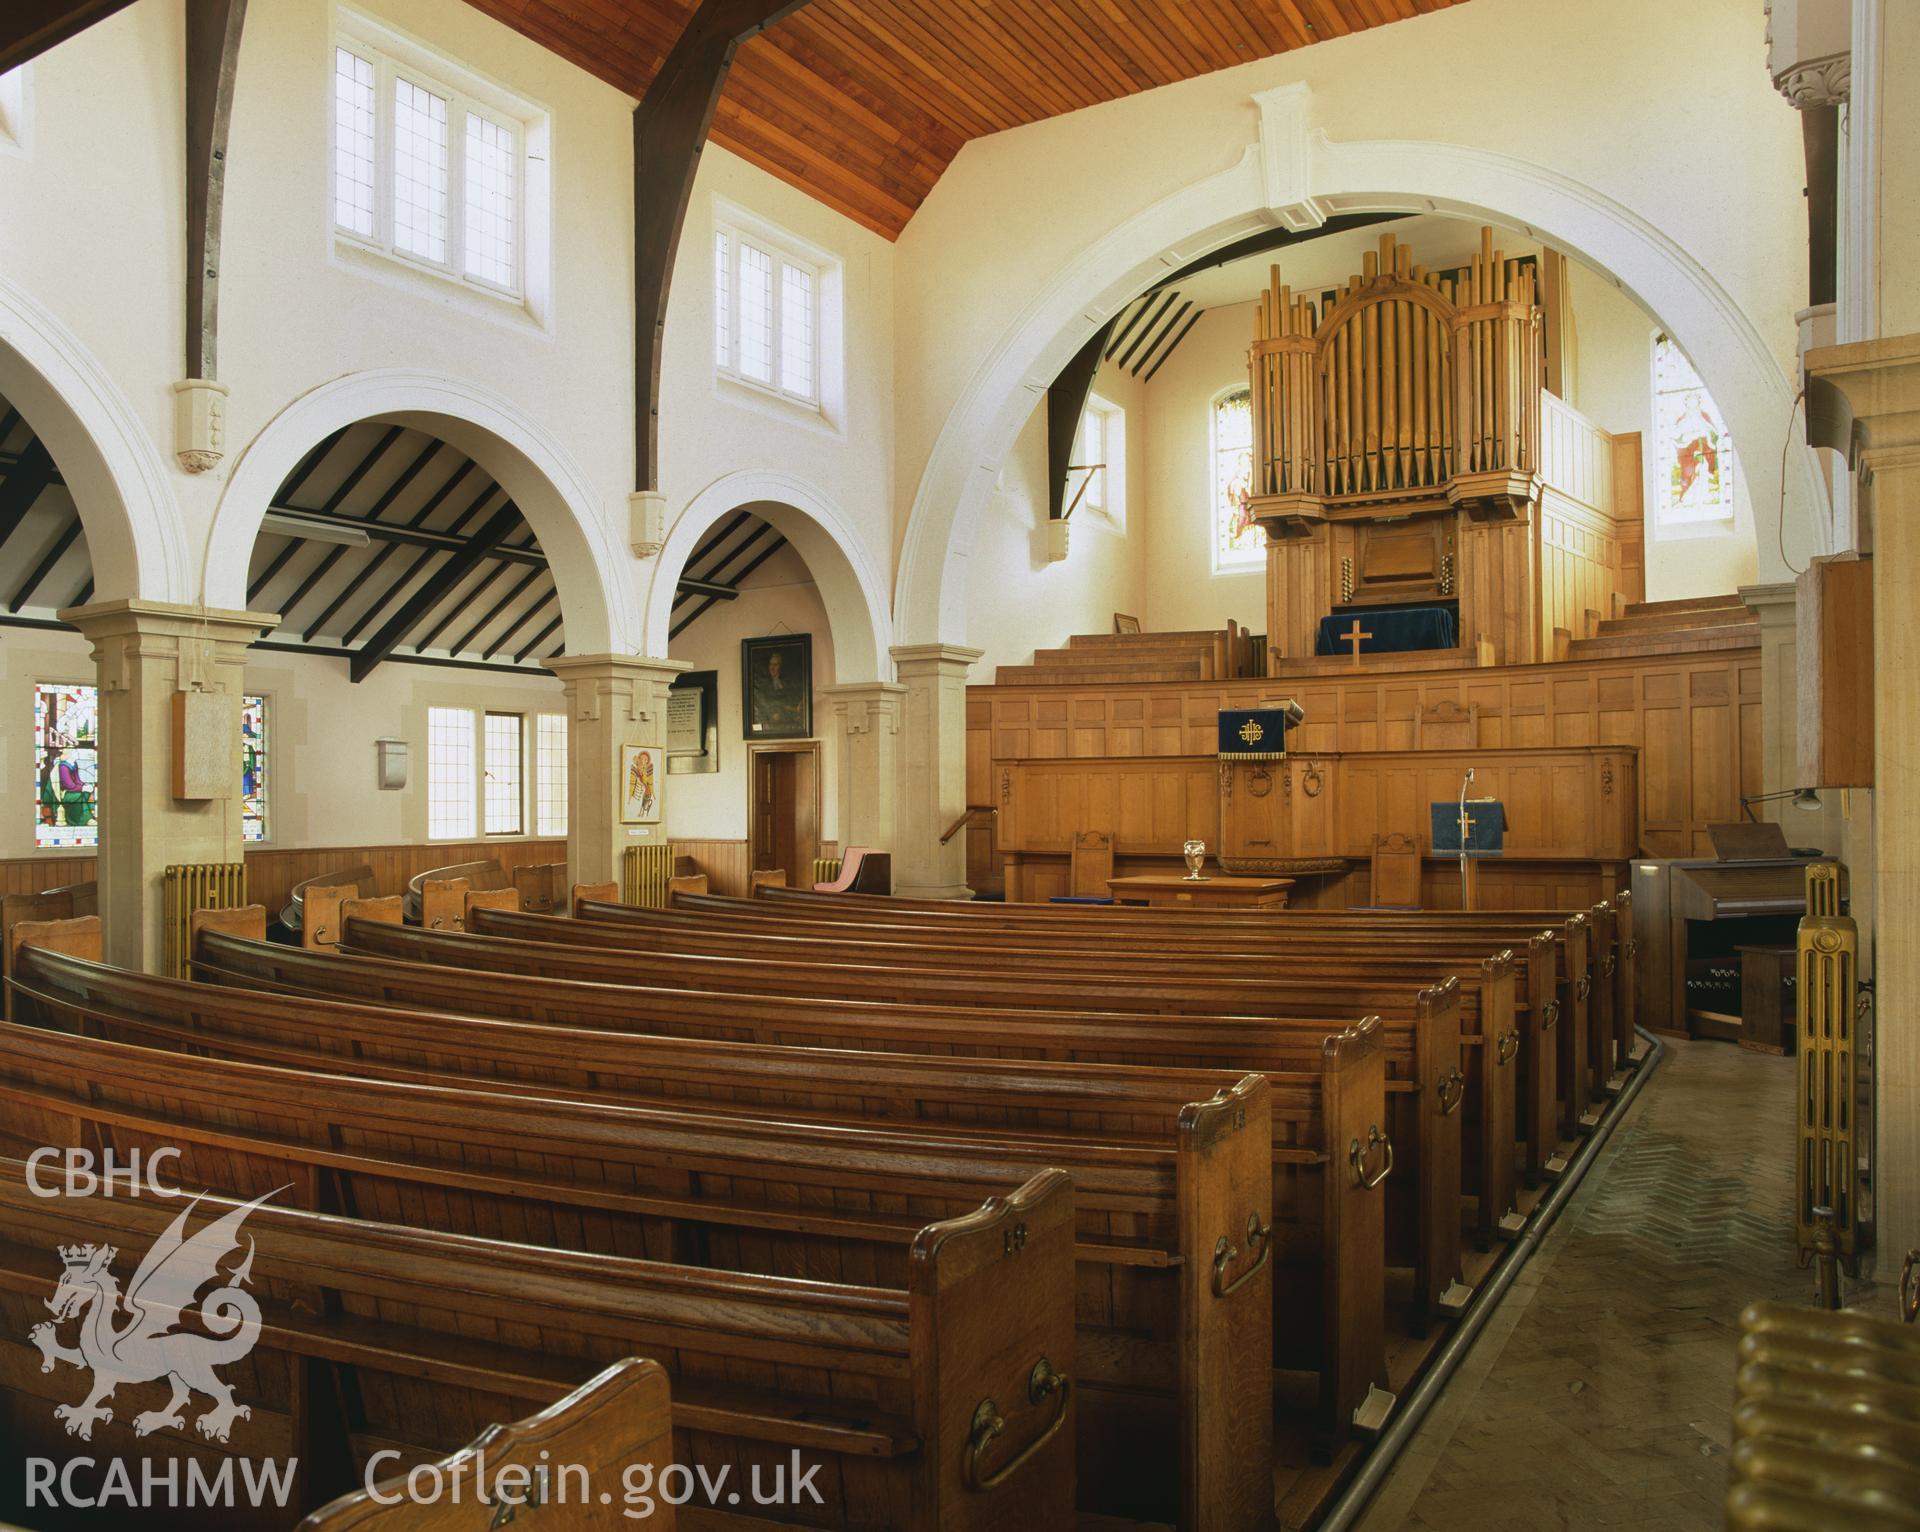 RCAHMW colour transparency showing an interior view of Tabernacle Chapel, Milford Haven.